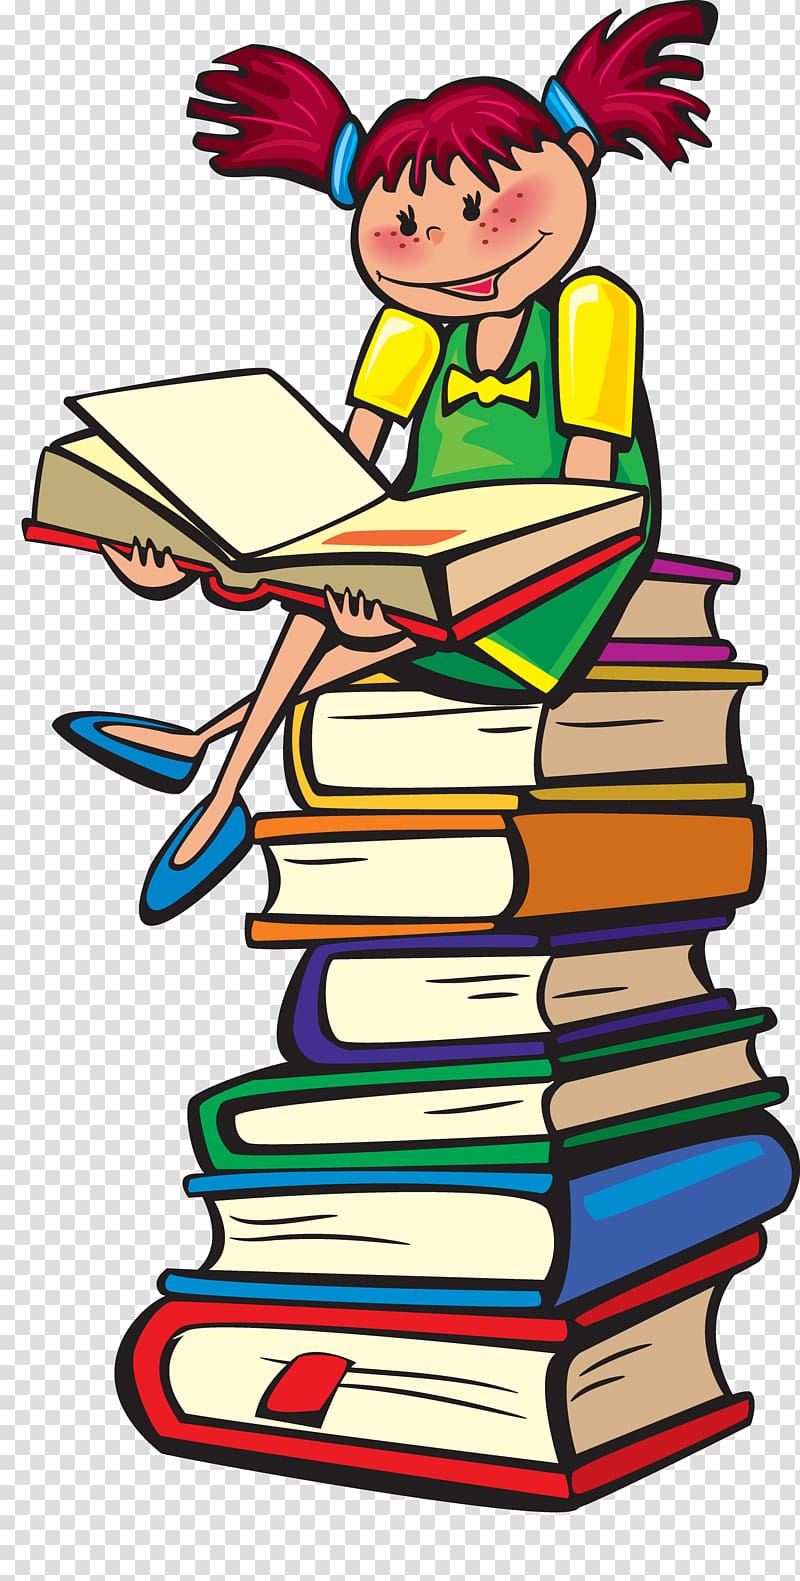 Library Book School Class Education, child education transparent background PNG clipart